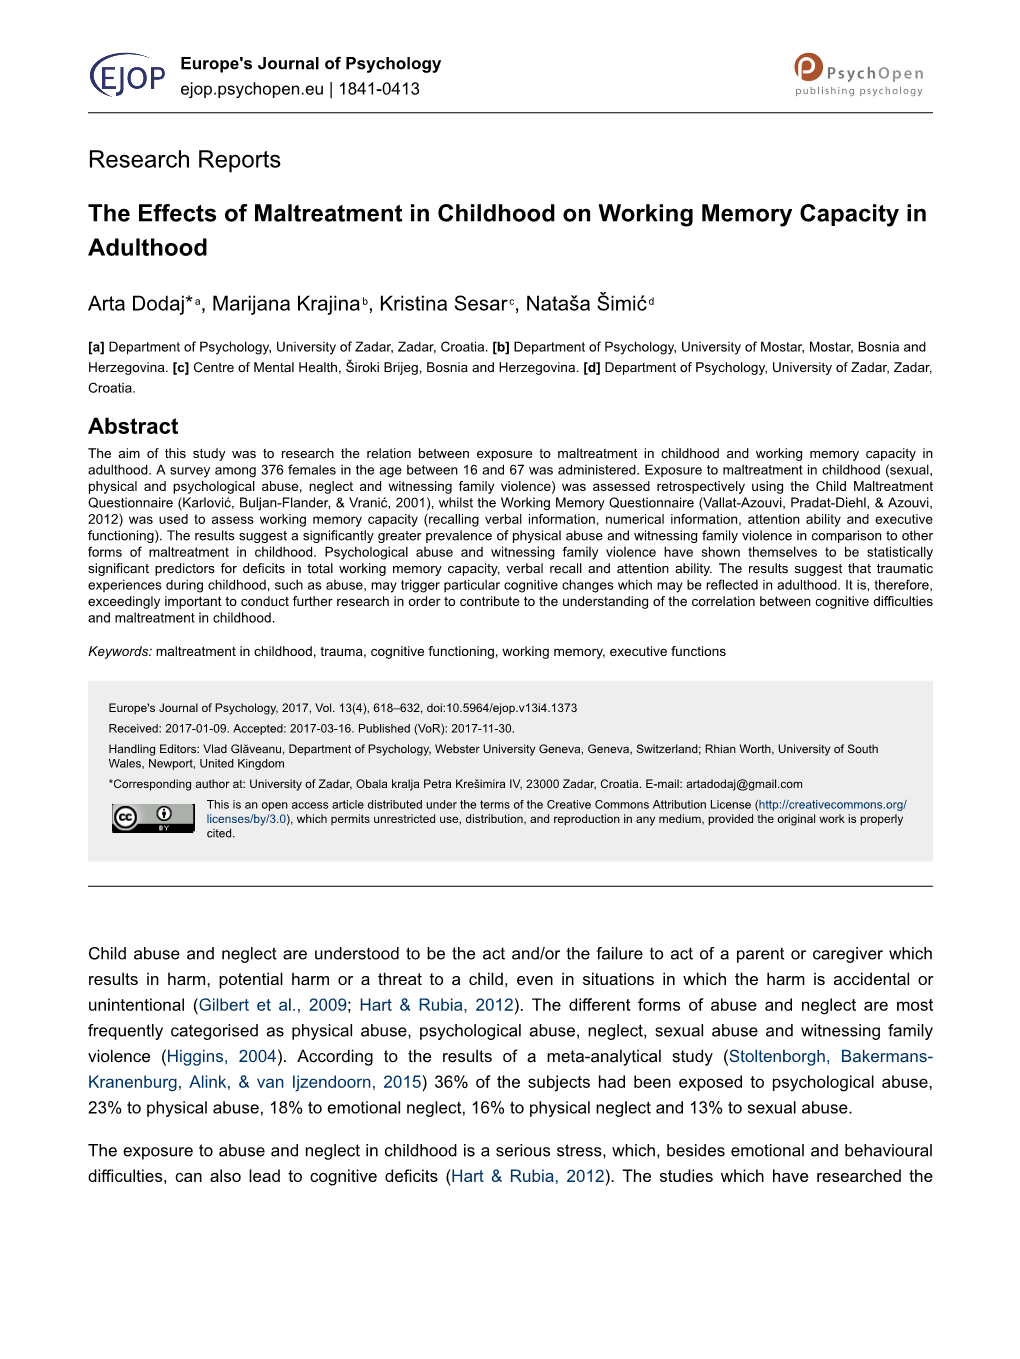 The Effects of Maltreatment in Childhood on Working Memory Capacity in Adulthood